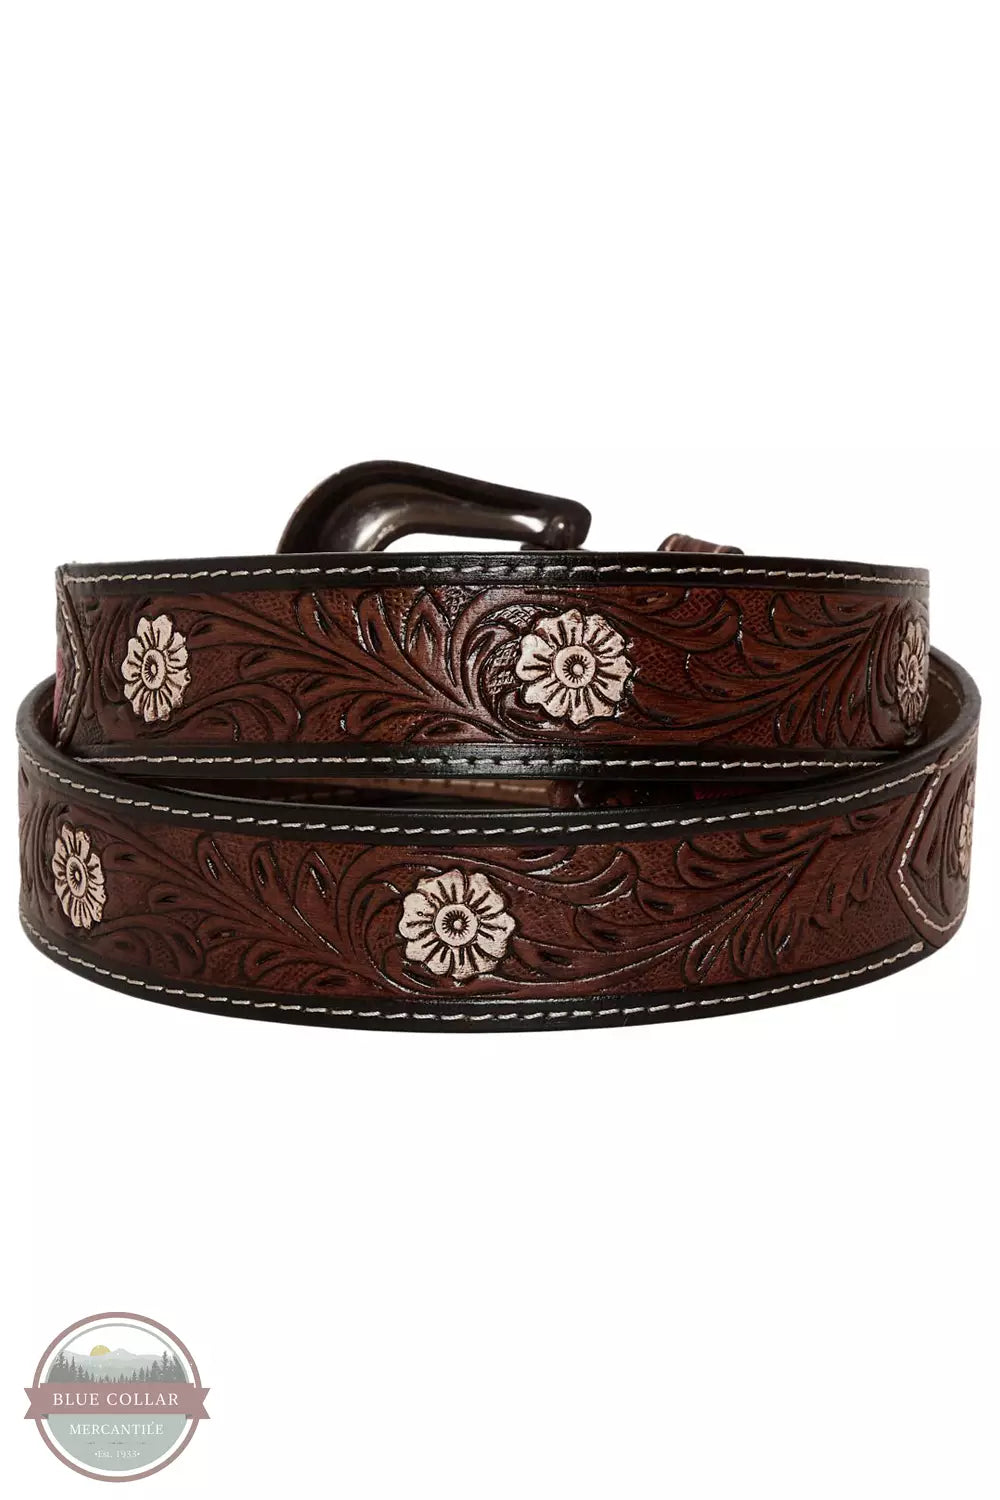 Myra Bag S-4062 Pink Feather Hand-Tooled Leather Belt Back View